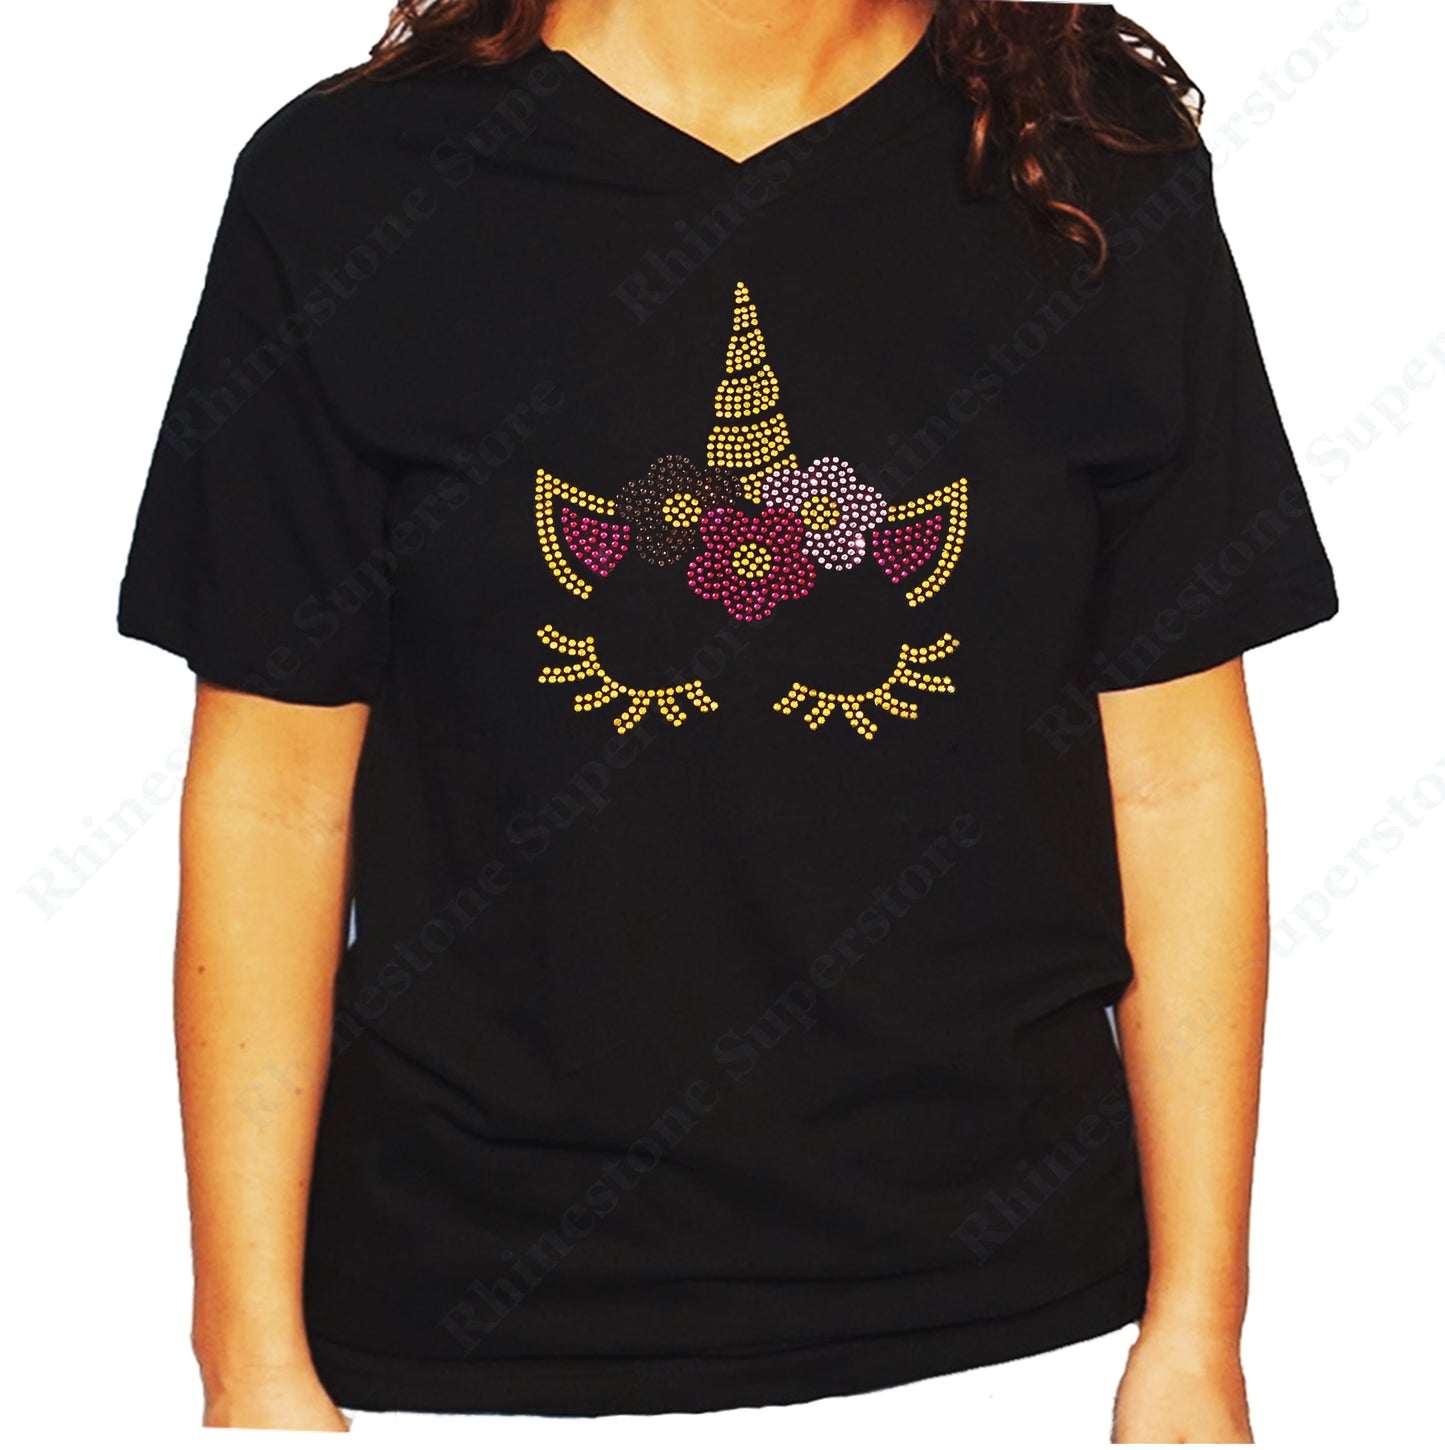 Women's / Unisex T-Shirt with Colorful Unicorn Face in Rhinestud